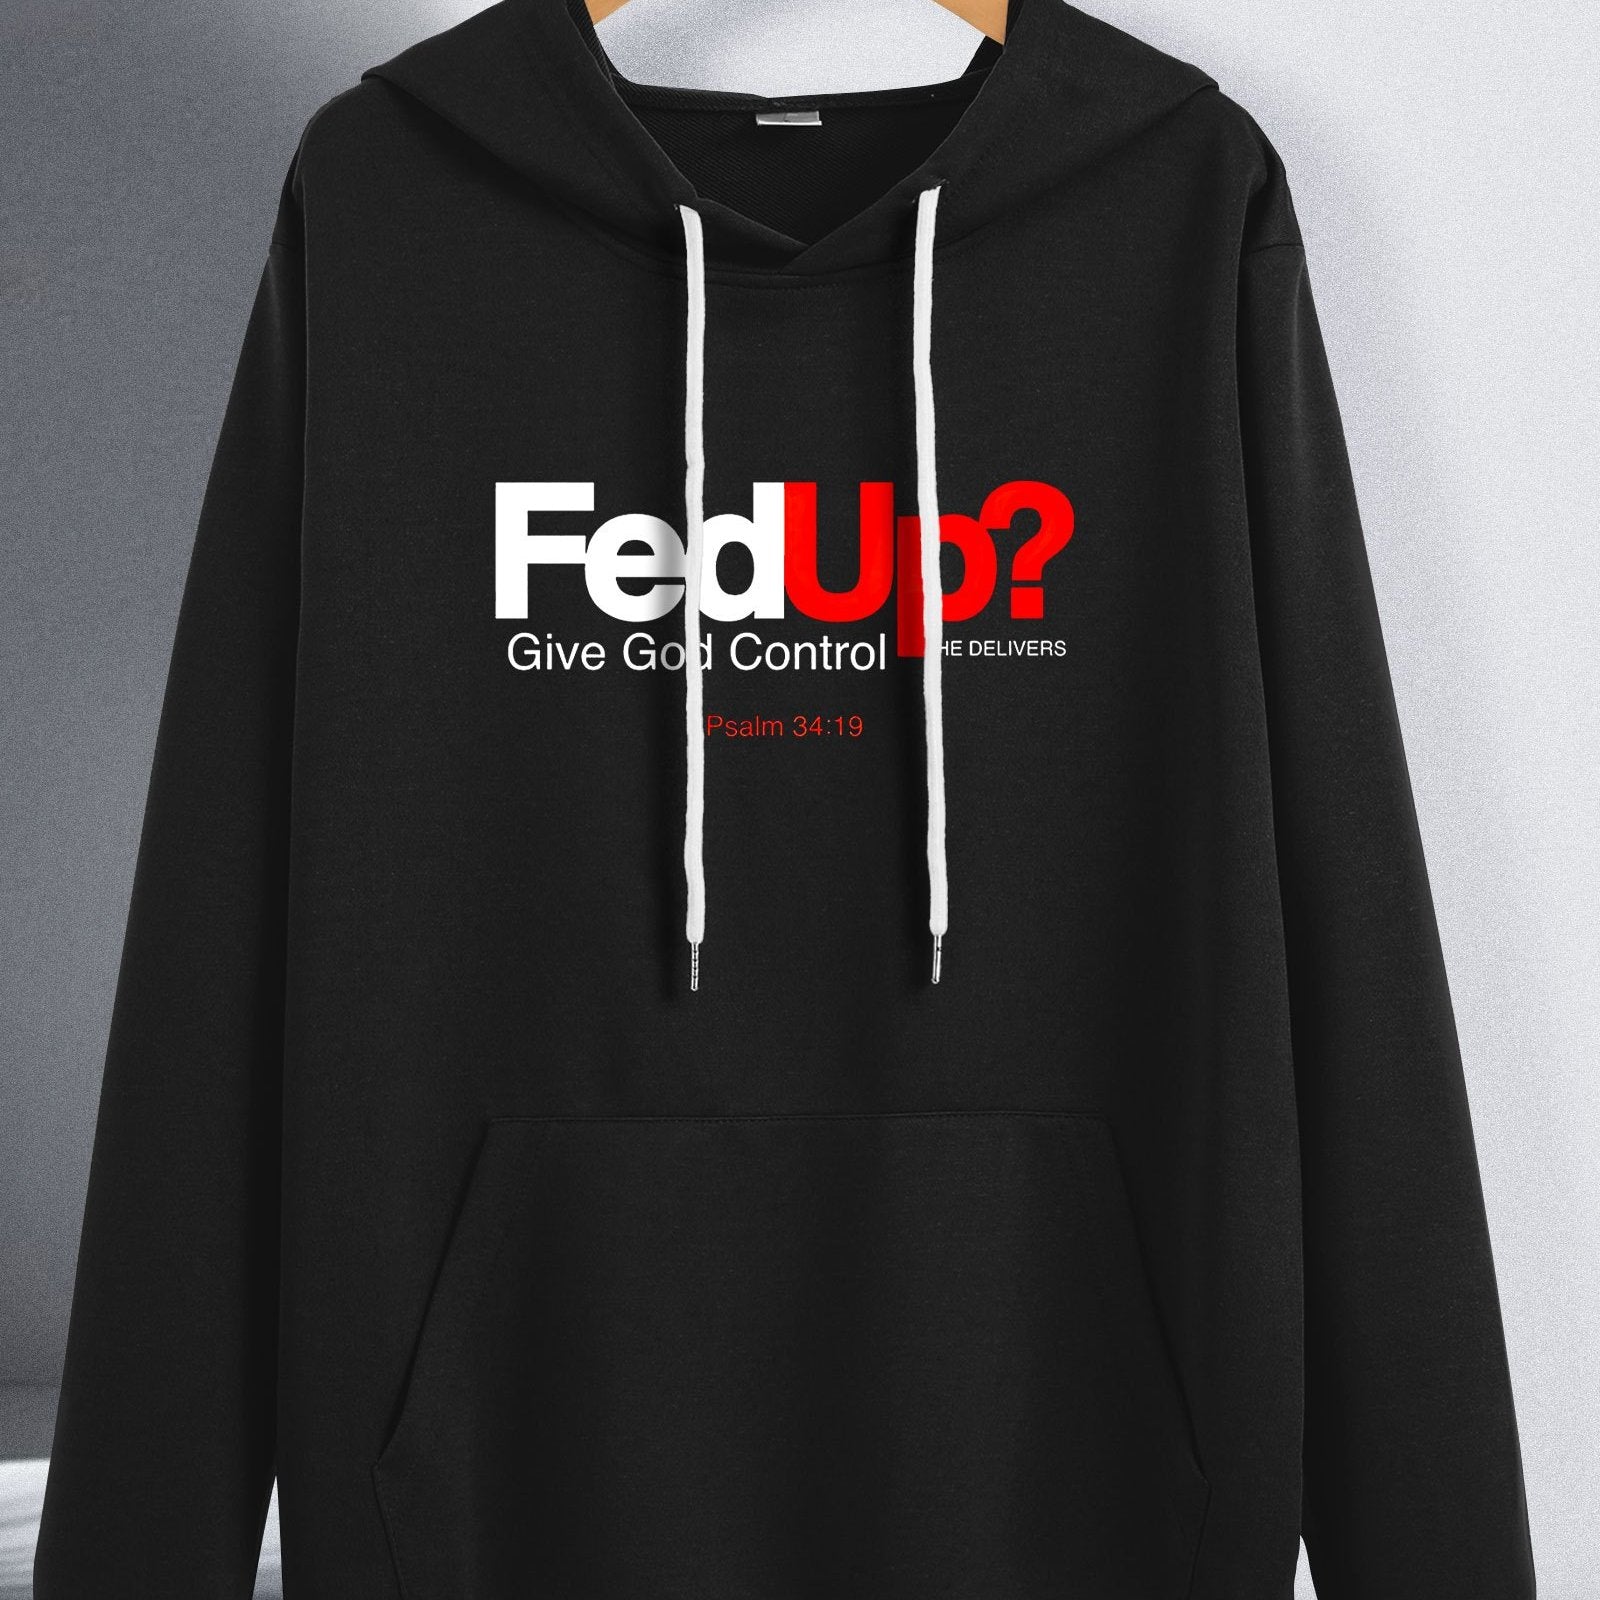 Fed Up Give God Control He Delivers Men's Christian Pullover Hooded Sweatshirt claimedbygoddesigns